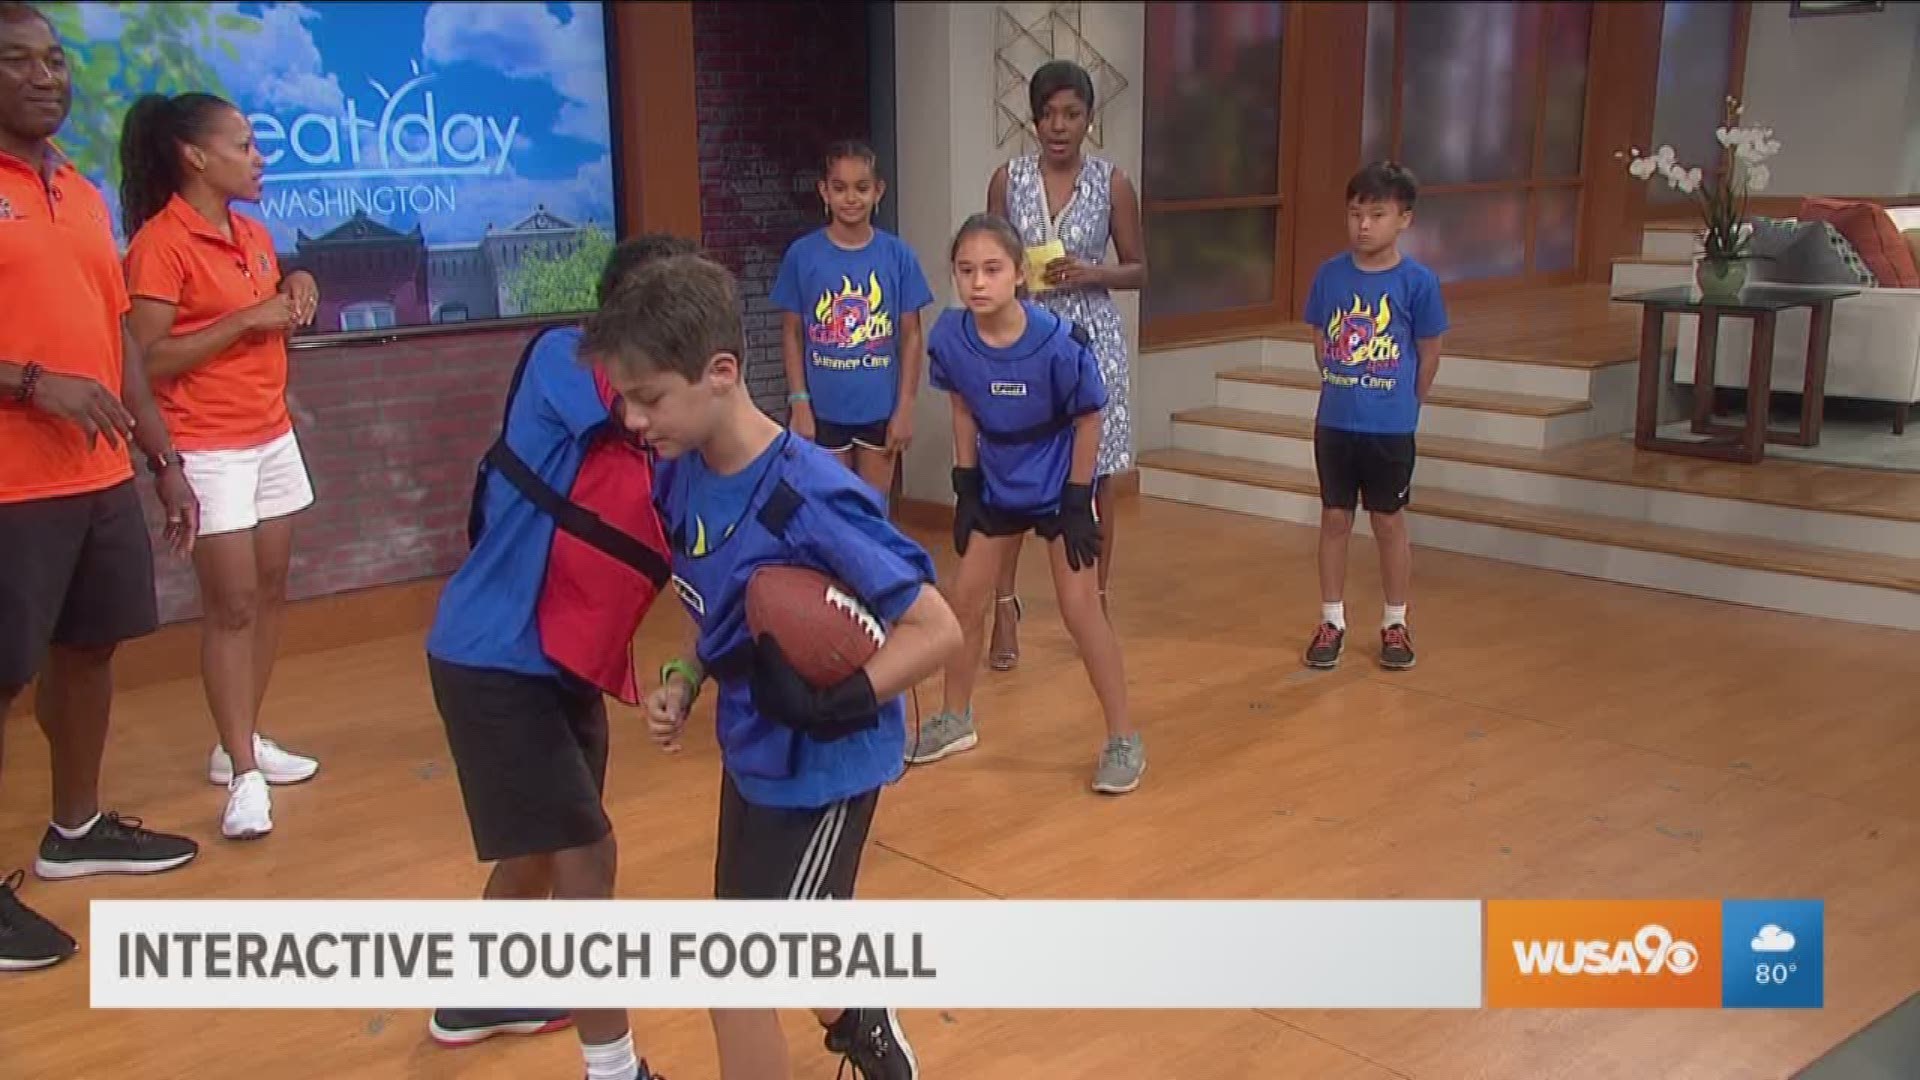 In an effort to increase safety in football, interactive touch football is running a pilot program in the DC area. Markette talks to the founders of Kids Elite Sports to see how the program mixes newer technology to the traditional game.